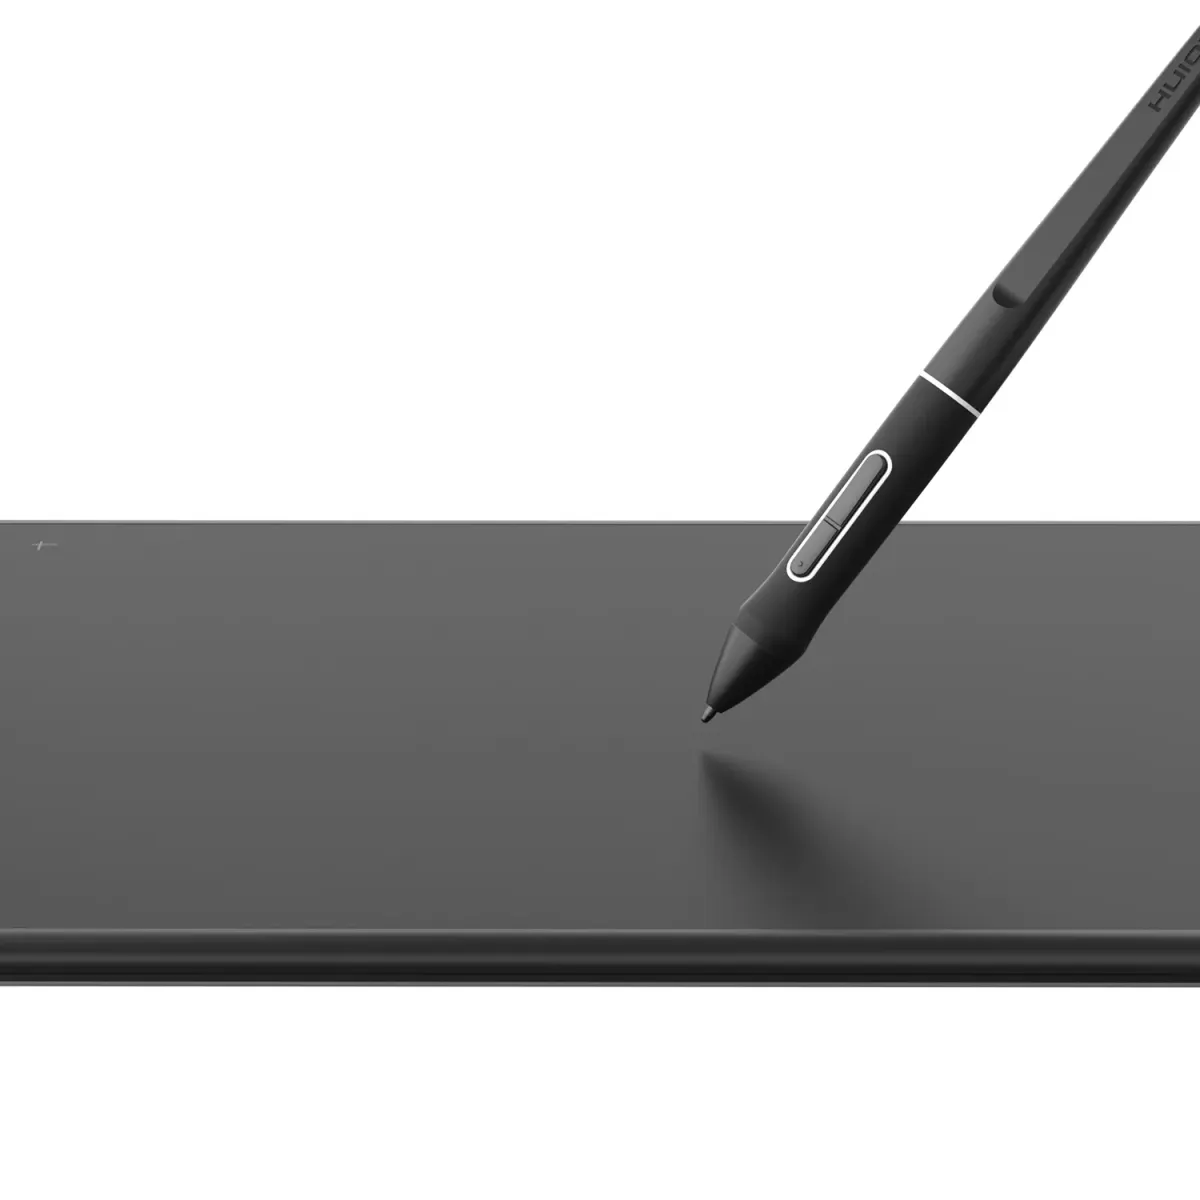 Introducing the All-in-One Pen Computer: Huion Kamvas Studio 22  Huion  Official Store: Drawing Tablets, Pen Tablets, Pen Display, Led Light Pad